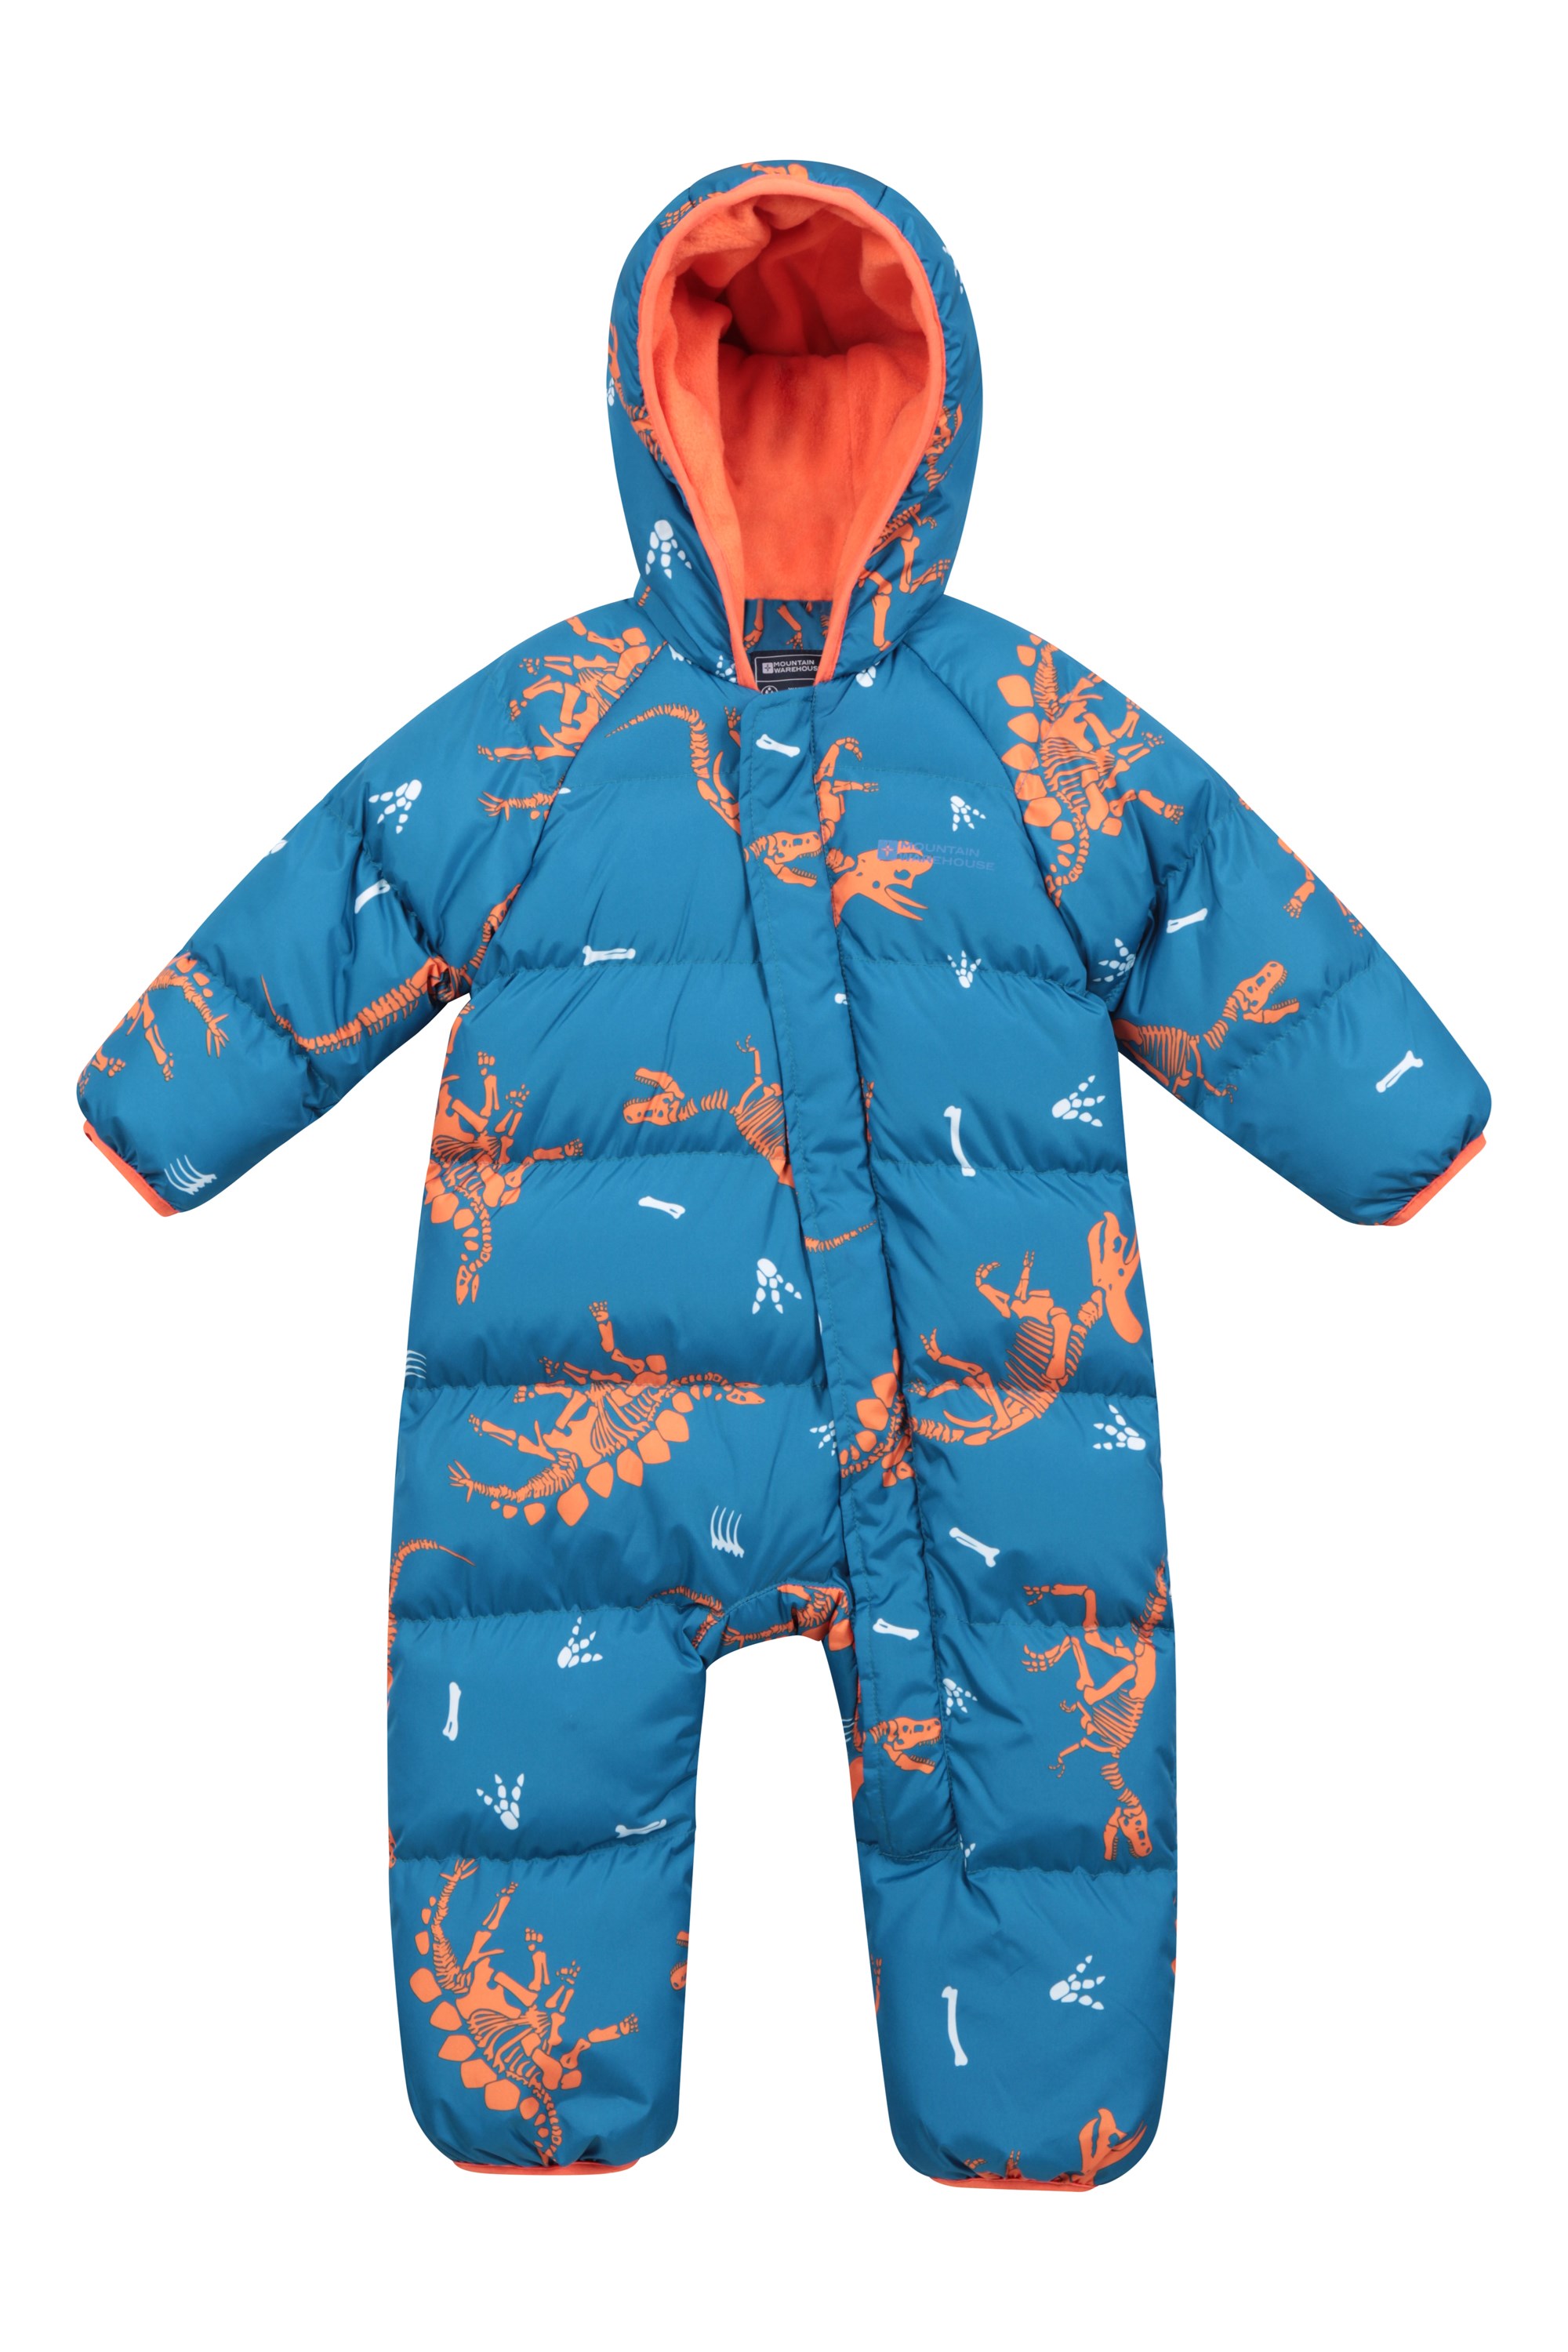 Frosty Printed Toddler Padded Suit - Orange